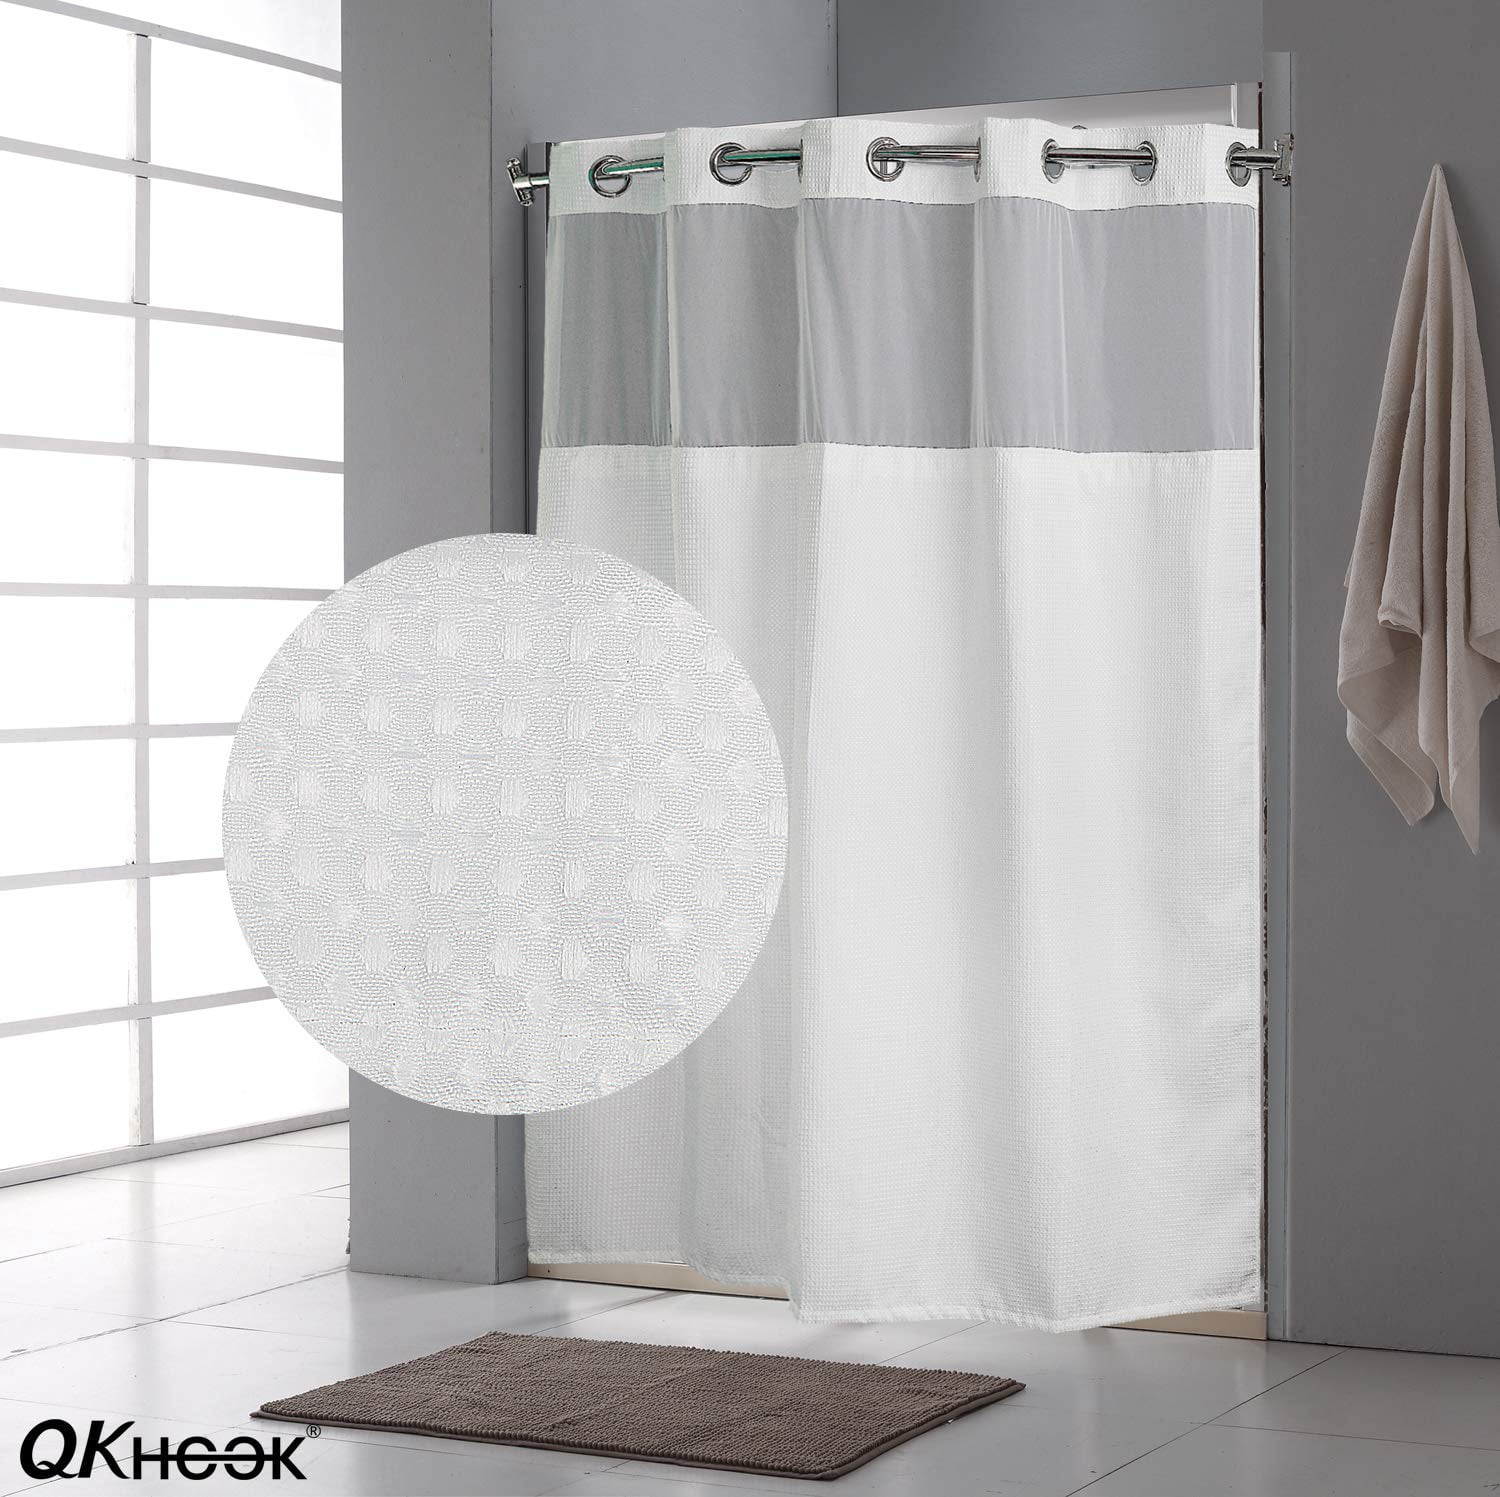 Qkhook Hookless Shower Curtain With, Best Hookless Shower Curtain